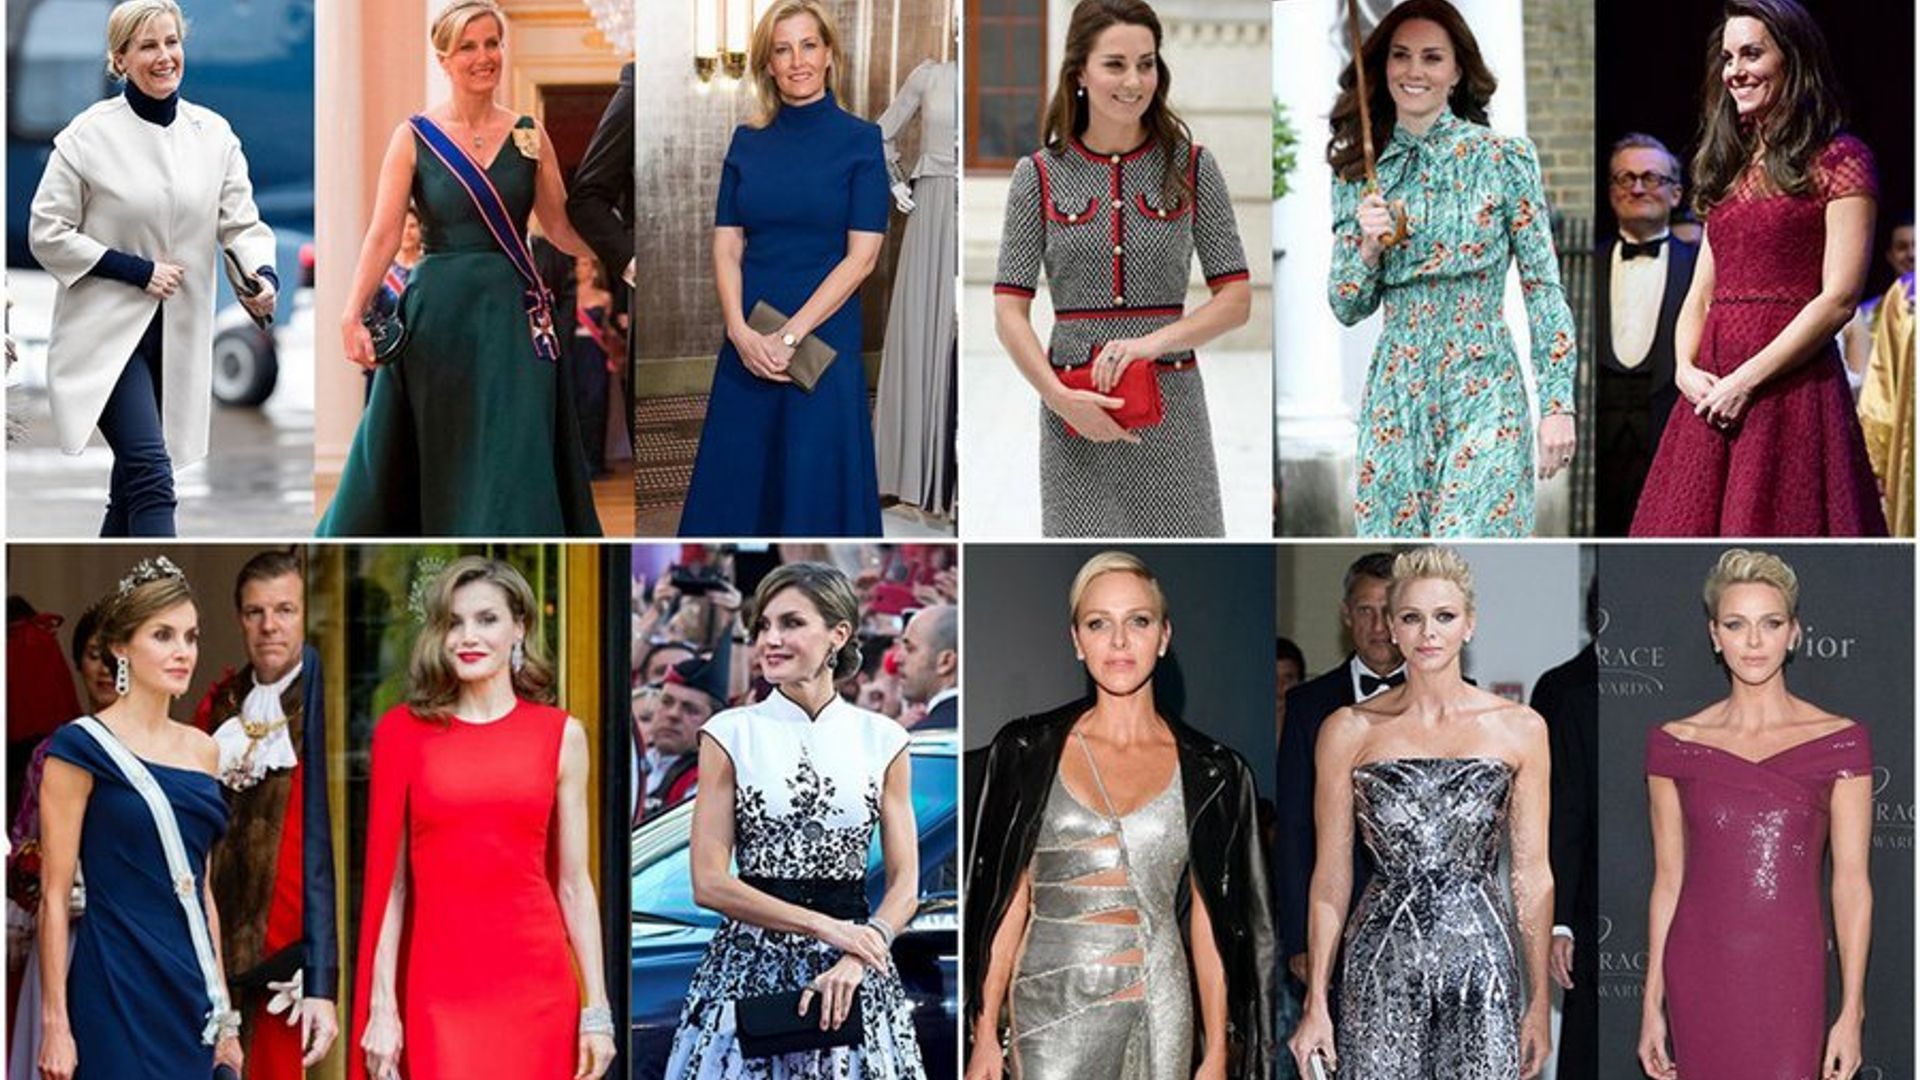 Royalty in fashion: The best-dressed royals of 2017